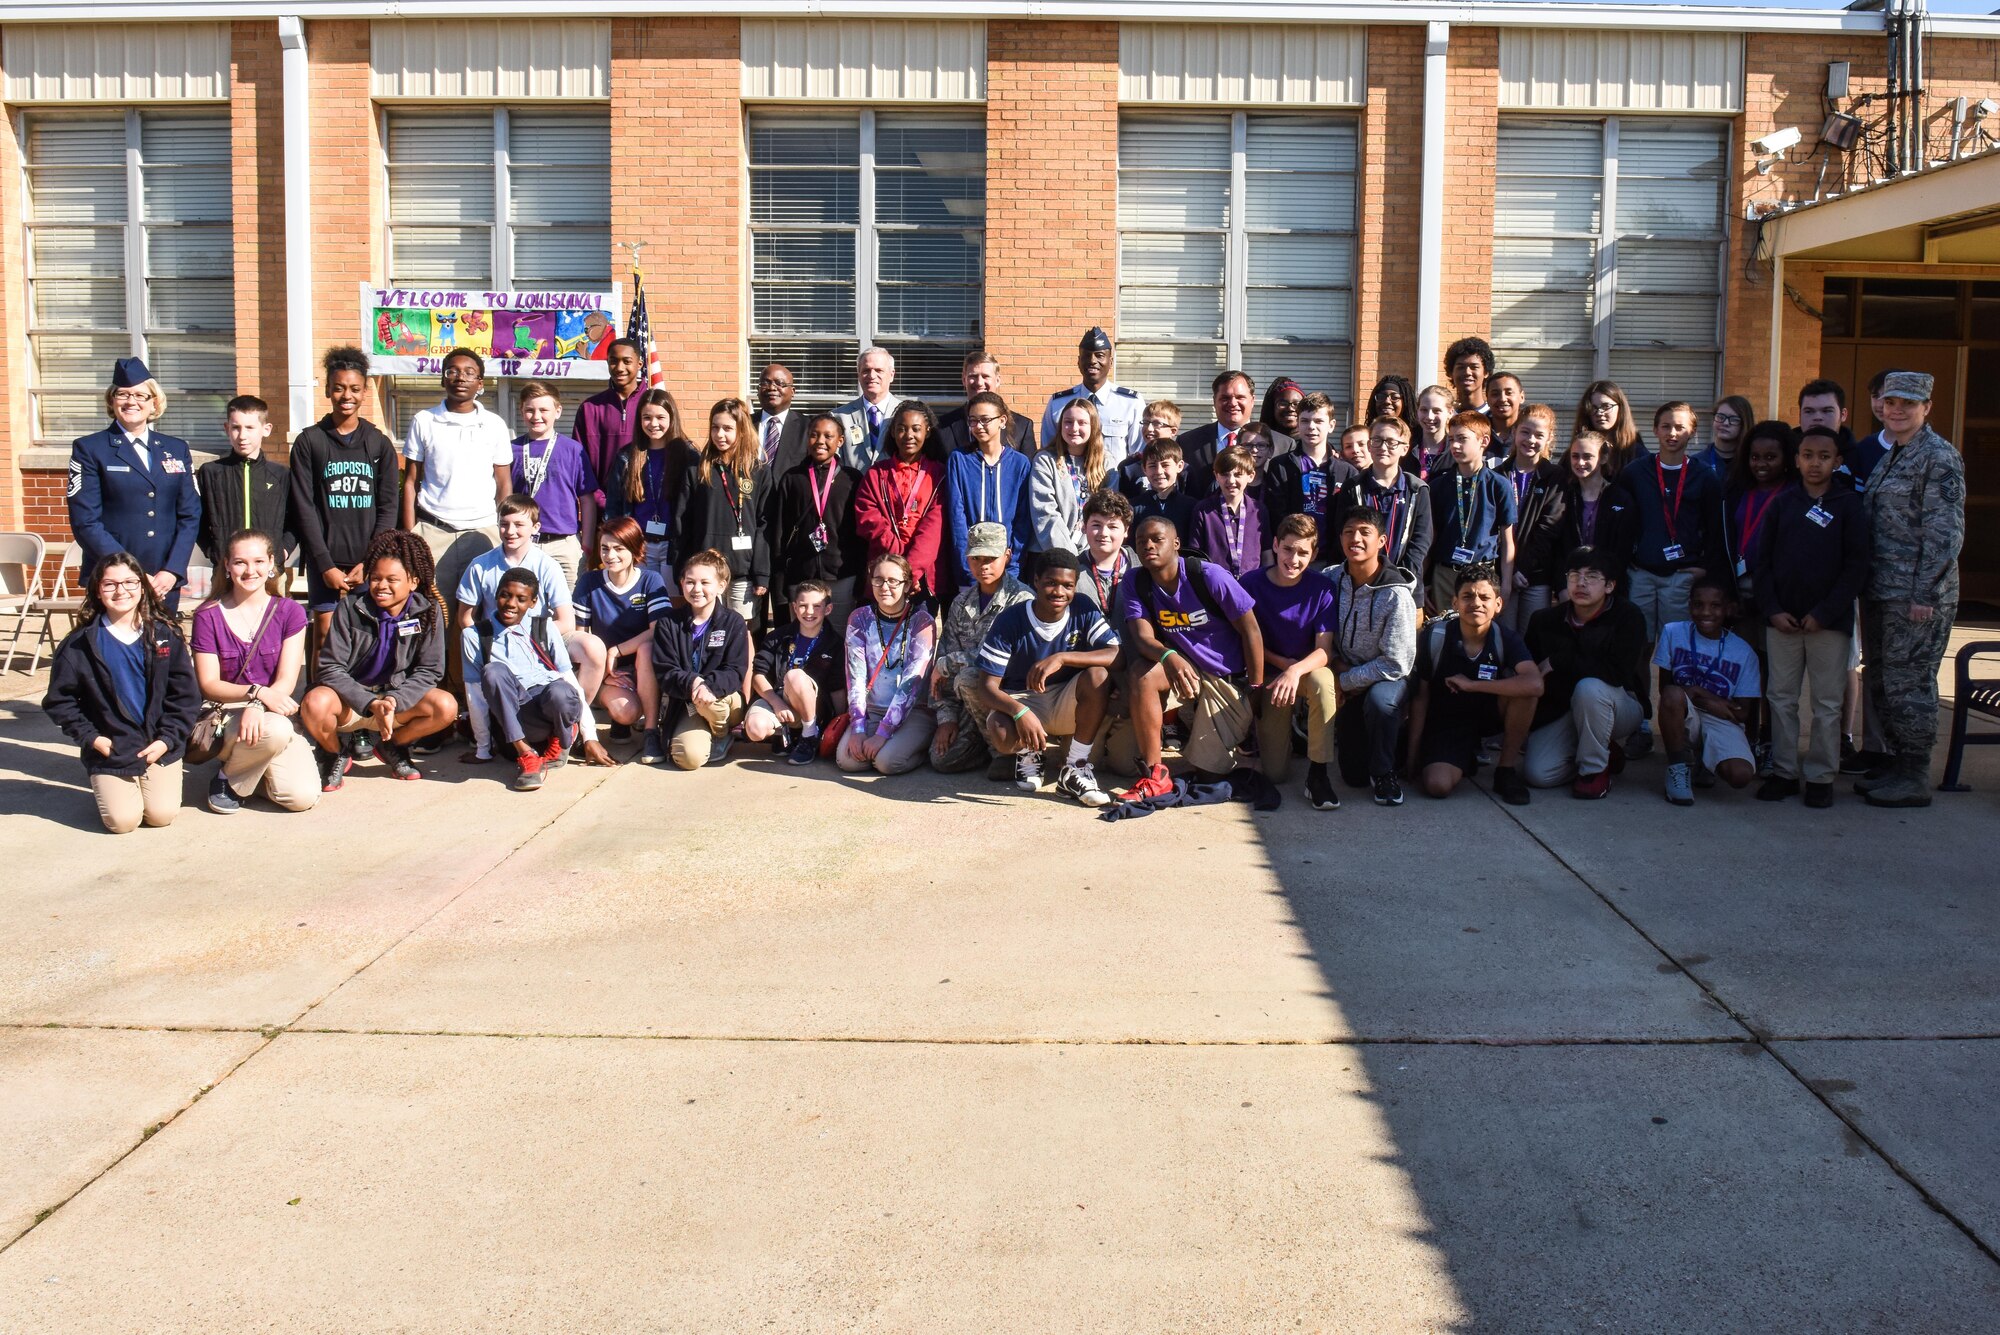 Senators, school superintendents, congressmen, base personnel and military children pose for a photo during Purple-Up Say in Bossier City, La., April 7, 2017. Purple-Up Day is a way for the community to showcase their appreciation and give back to the children who serve. This year included a military child parade and ice cream for the kids after the ceremony. (U.S. Air Force photo/Senior Airman Luke Hill)